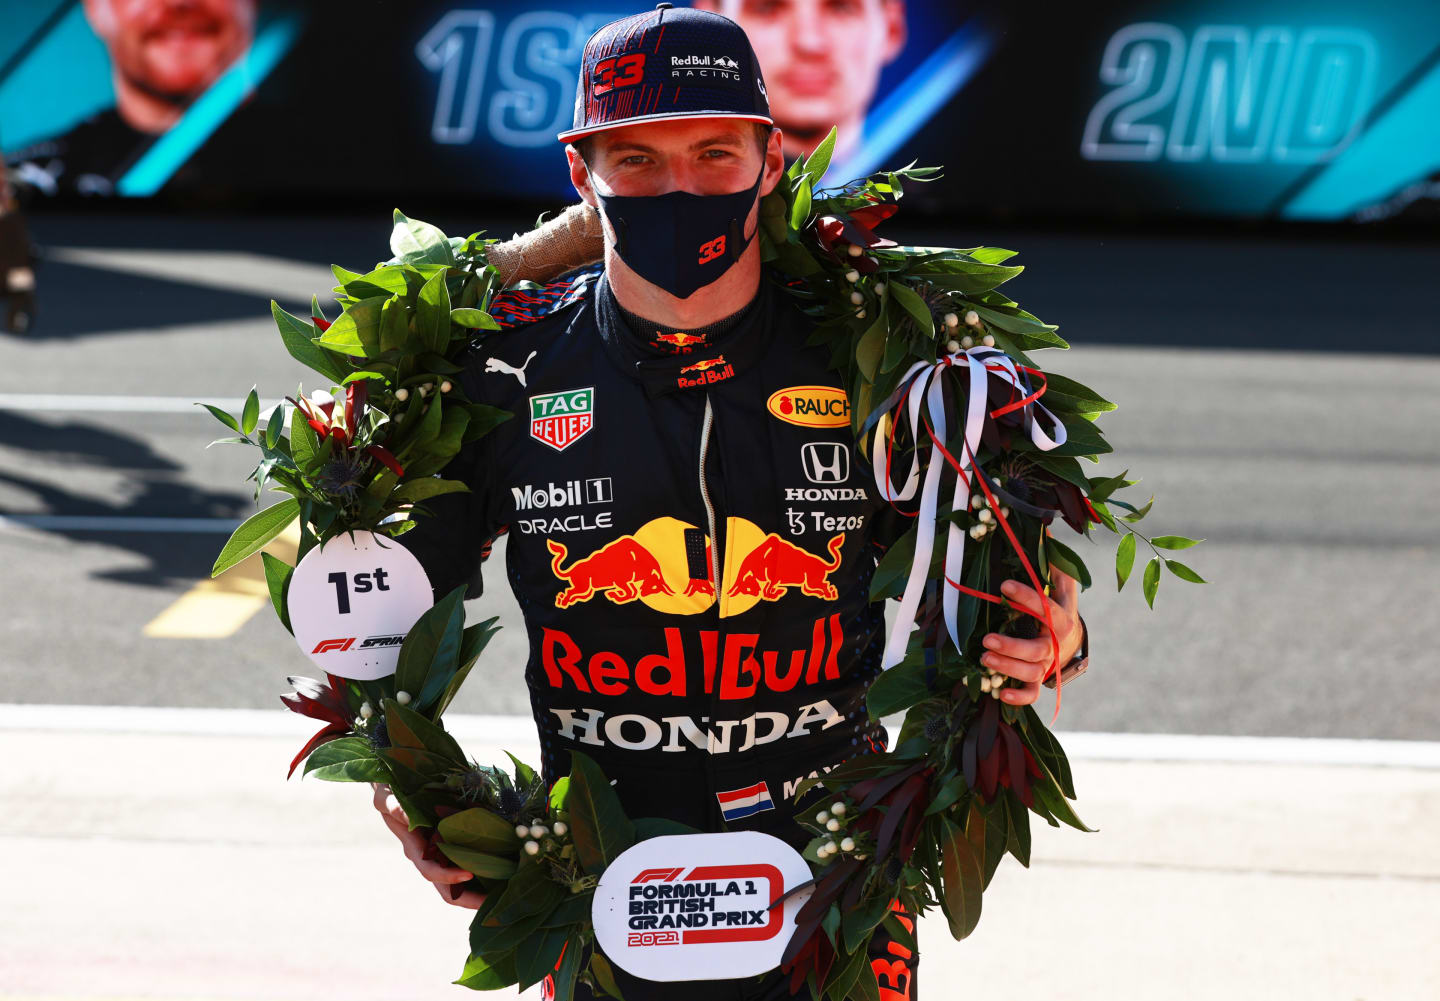 NORTHAMPTON, ENGLAND - JULY 17: Winner Max Verstappen of Netherlands and Red Bull Racing celebrates in parc ferme during the Sprint for the F1 Grand Prix of Great Britain at Silverstone on July 17, 2021 in Northampton, England. (Photo by Mark Thompson/Getty Images)